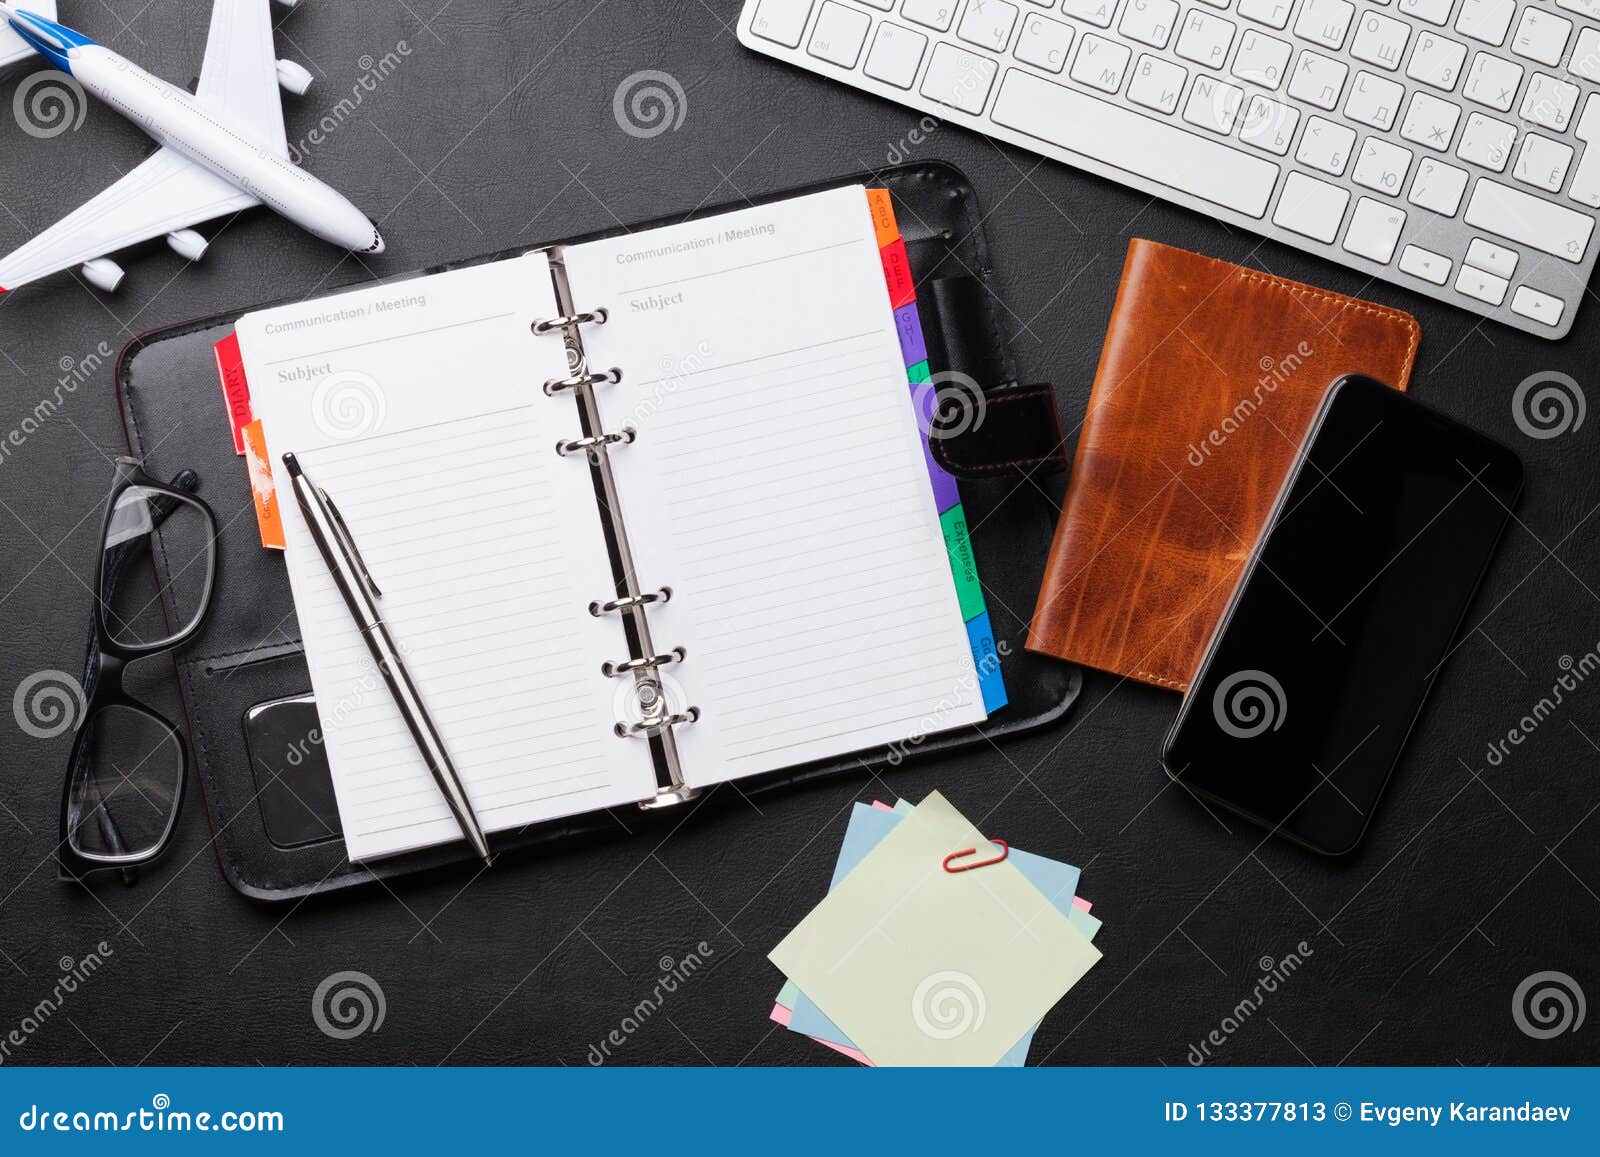 Business Trip Concept Accessories On Desk Table Stock Image